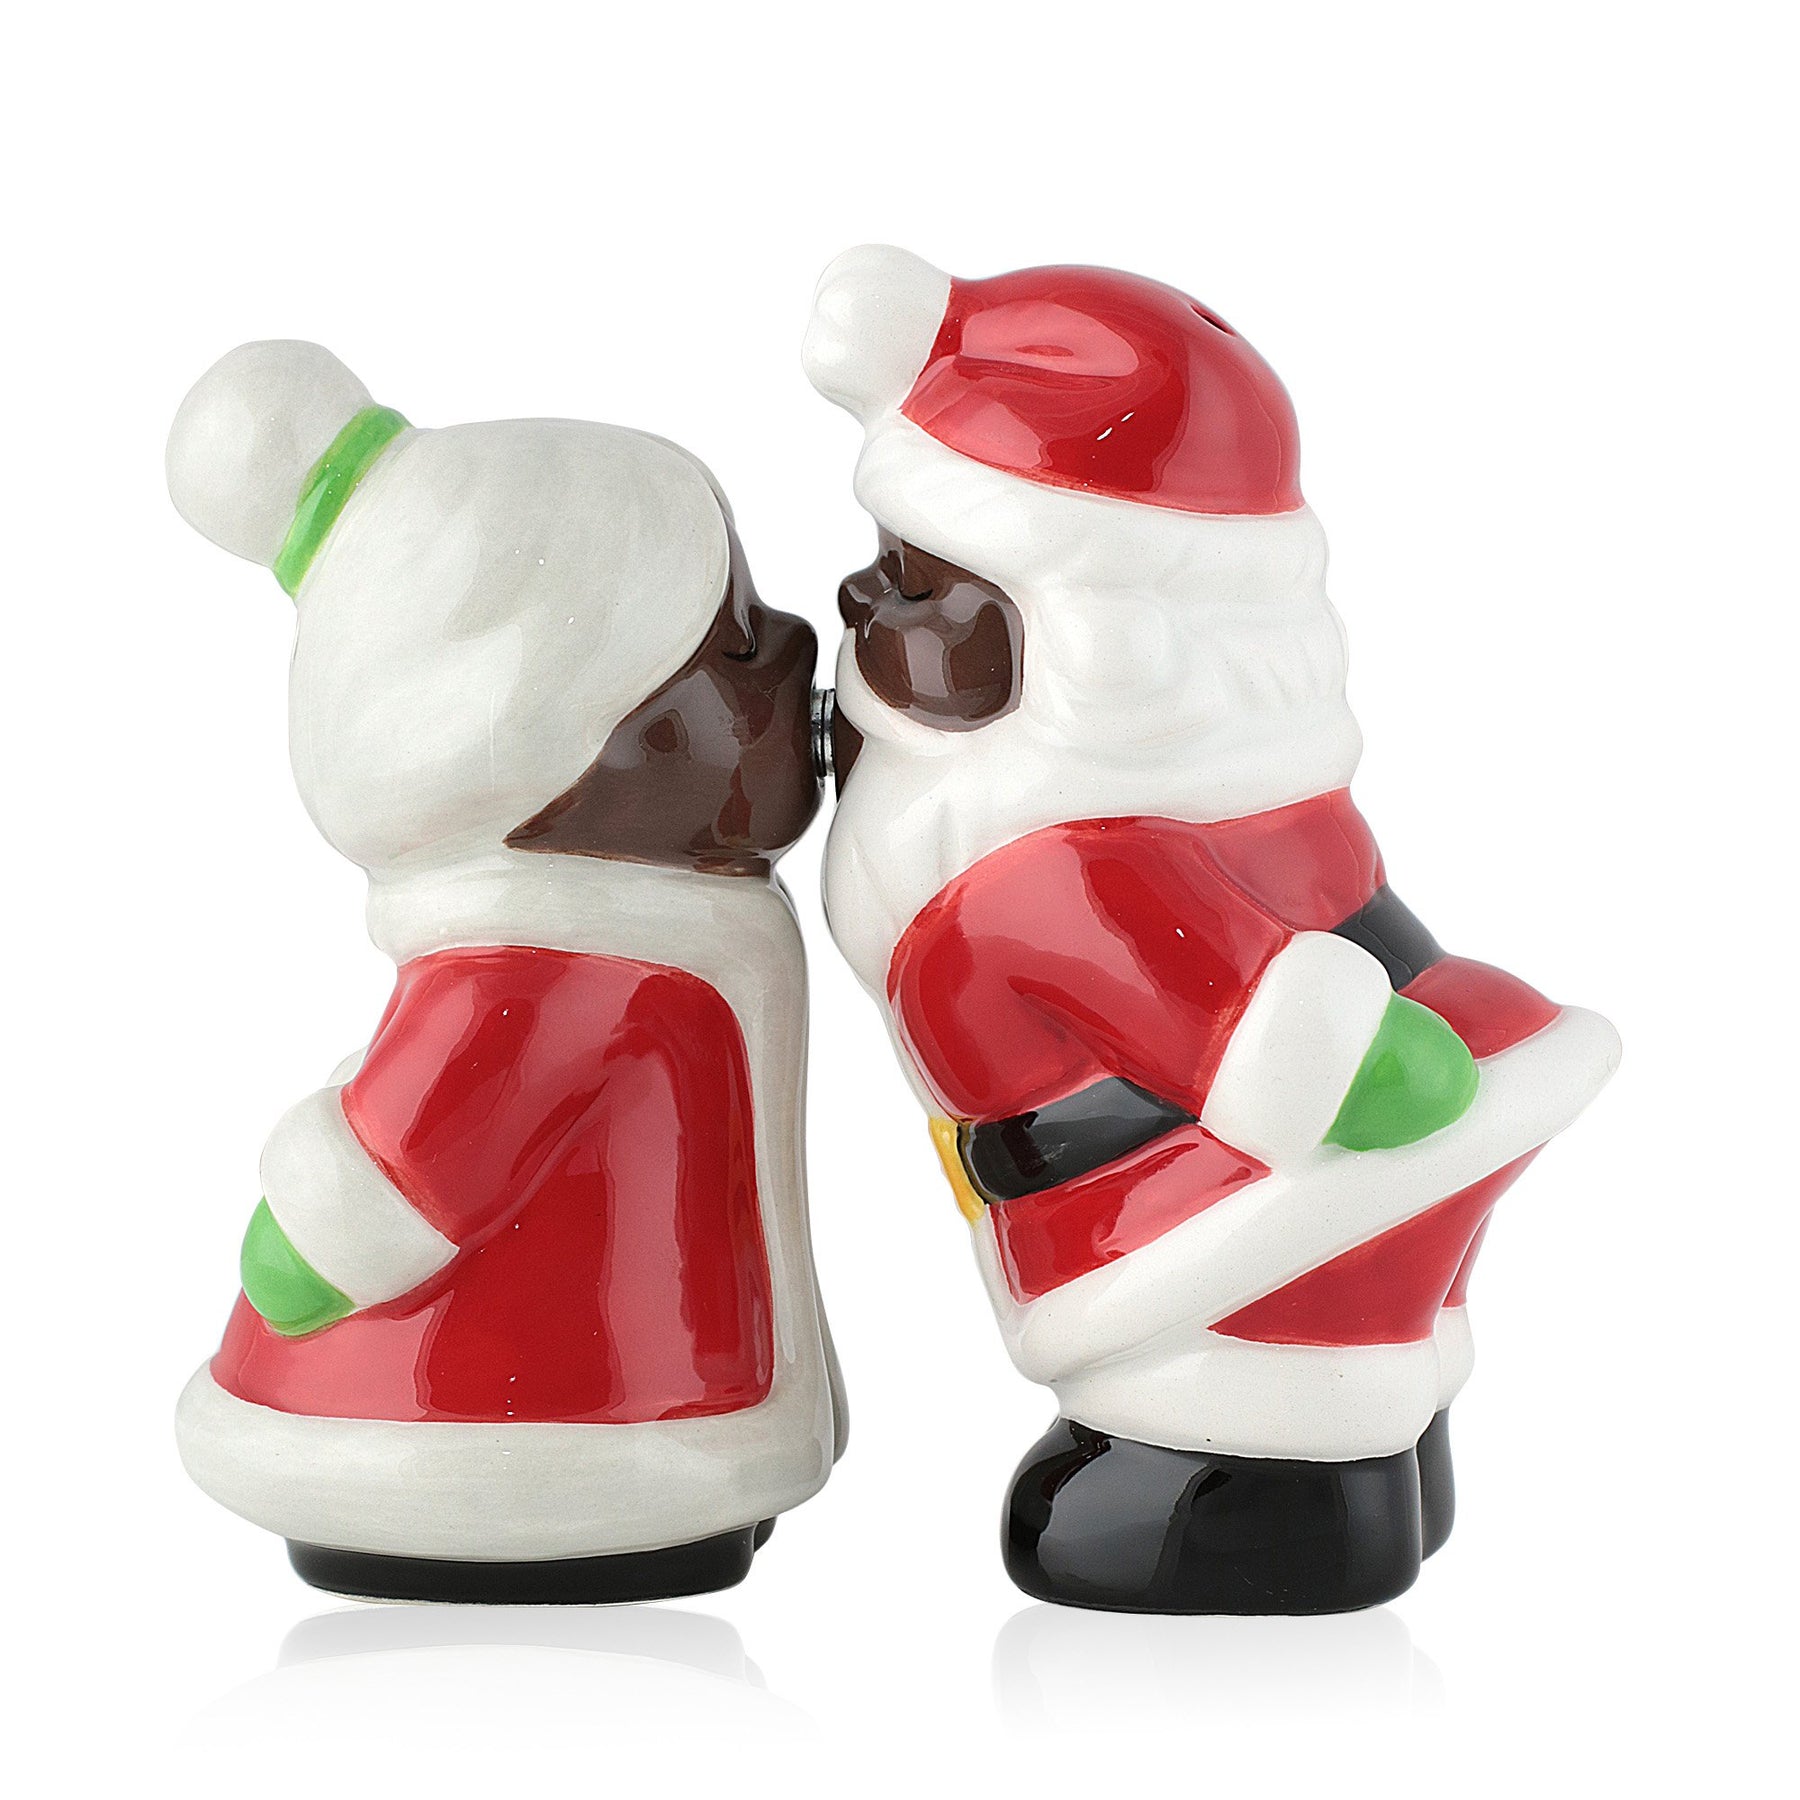 1 of 2: African American Santa Claus Salt and Pepper Shaker Set (Mr. and Mrs. Claus)